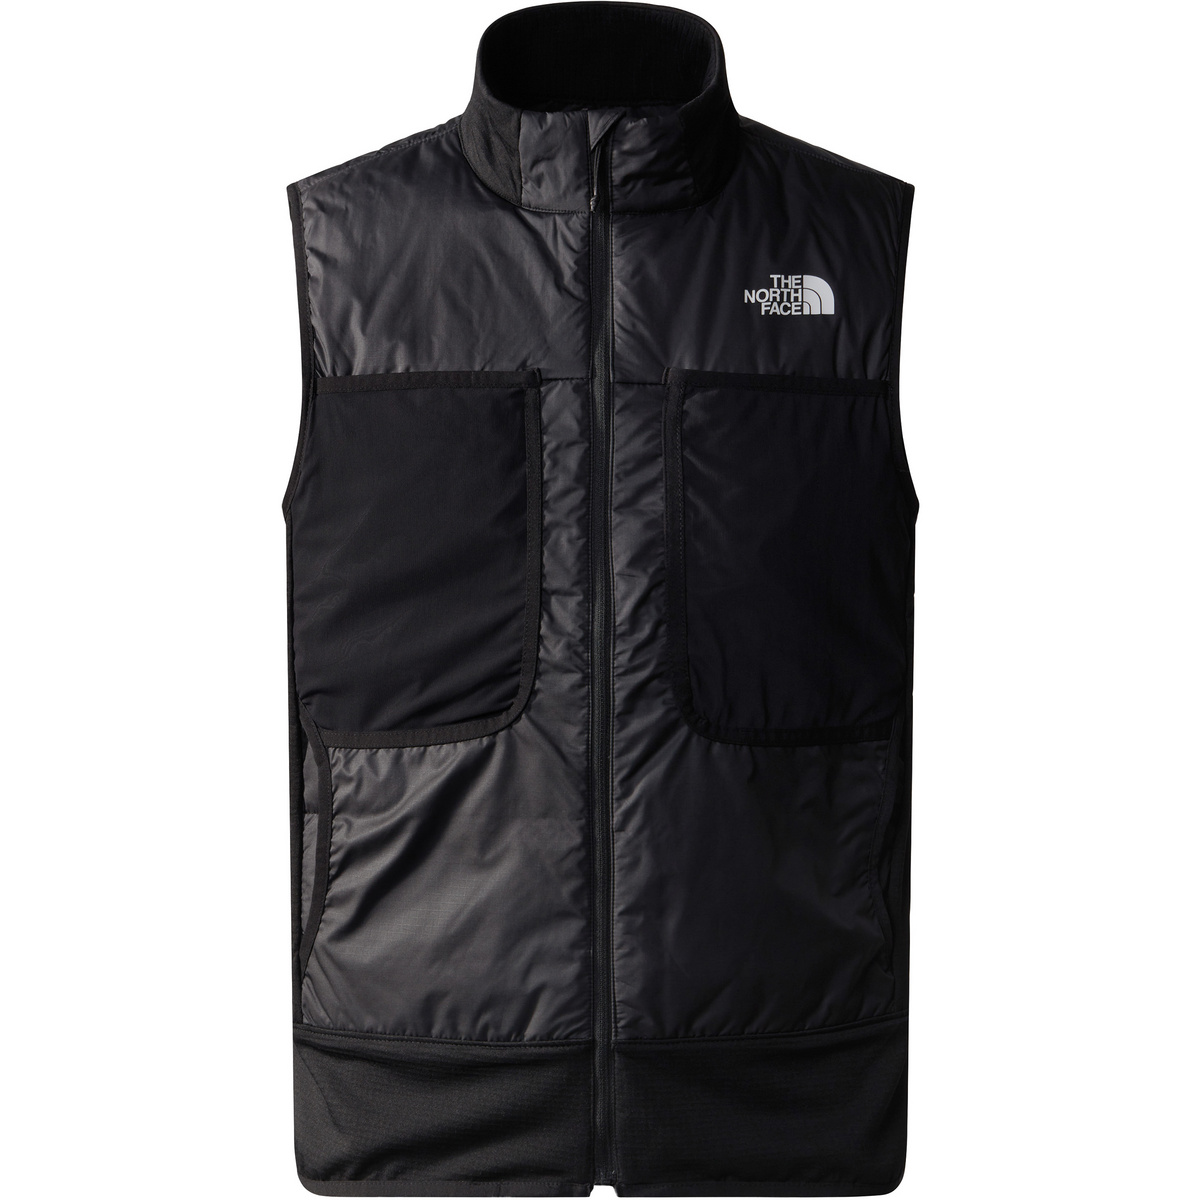 Image of The North Face Uomo Gilet Winter Warm Pro